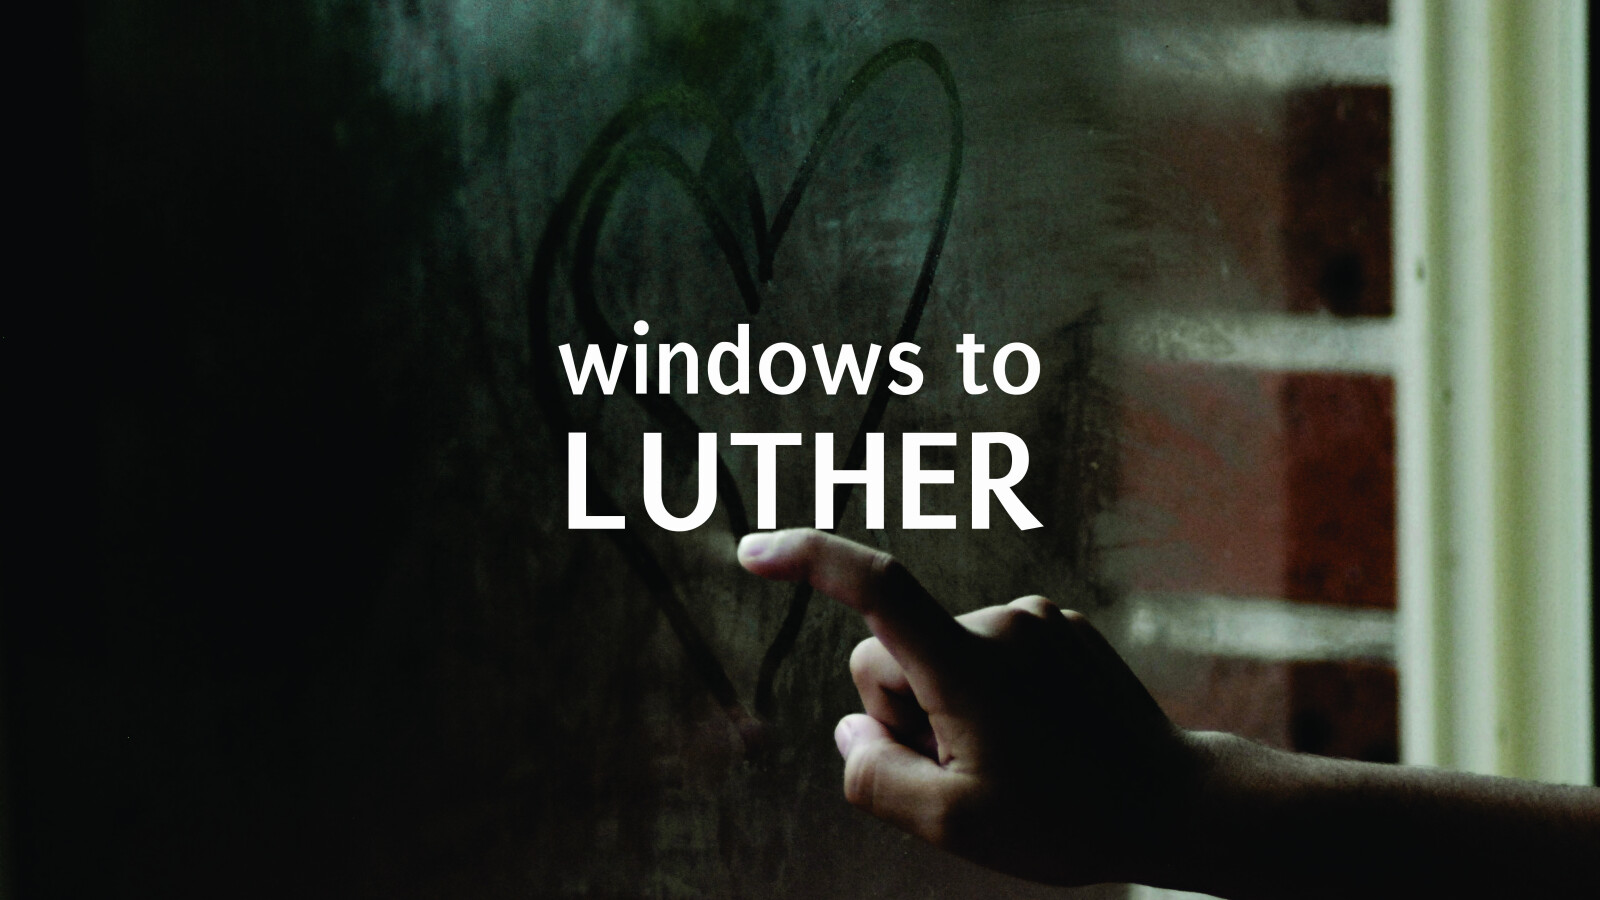 Windows to Luther